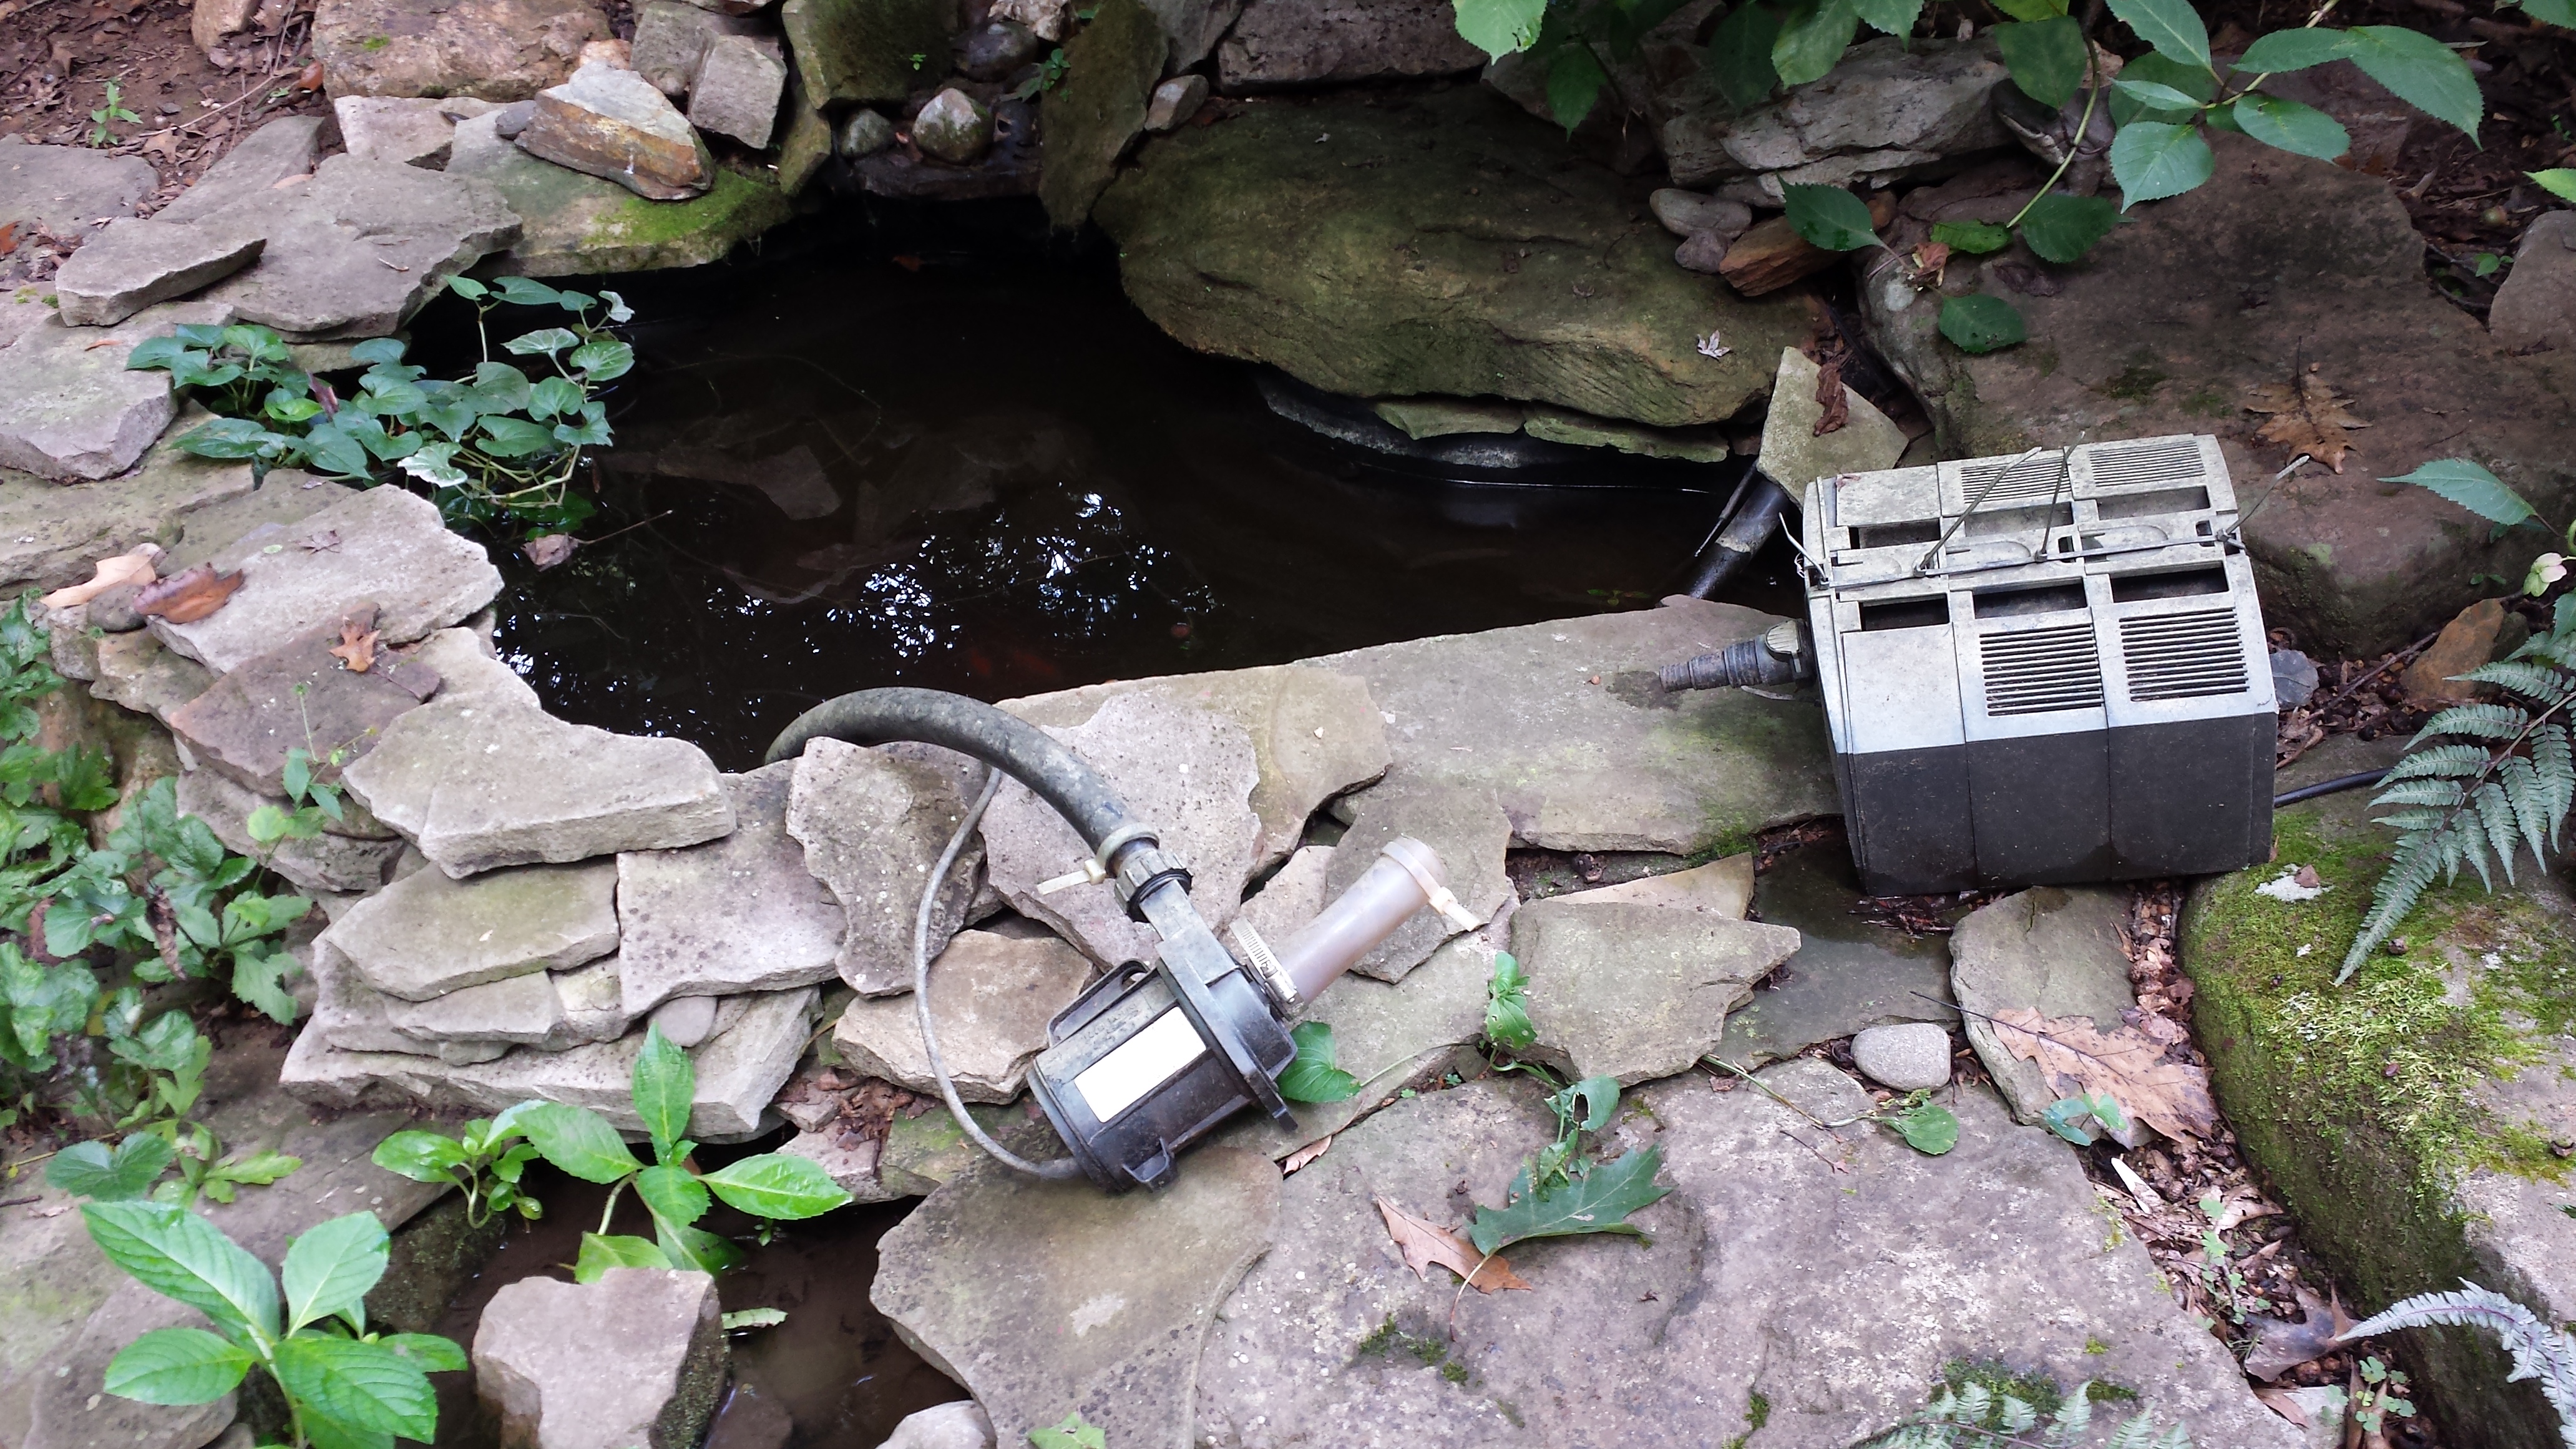 Removed the filter and pump from the pond to try to determine where the leak was located